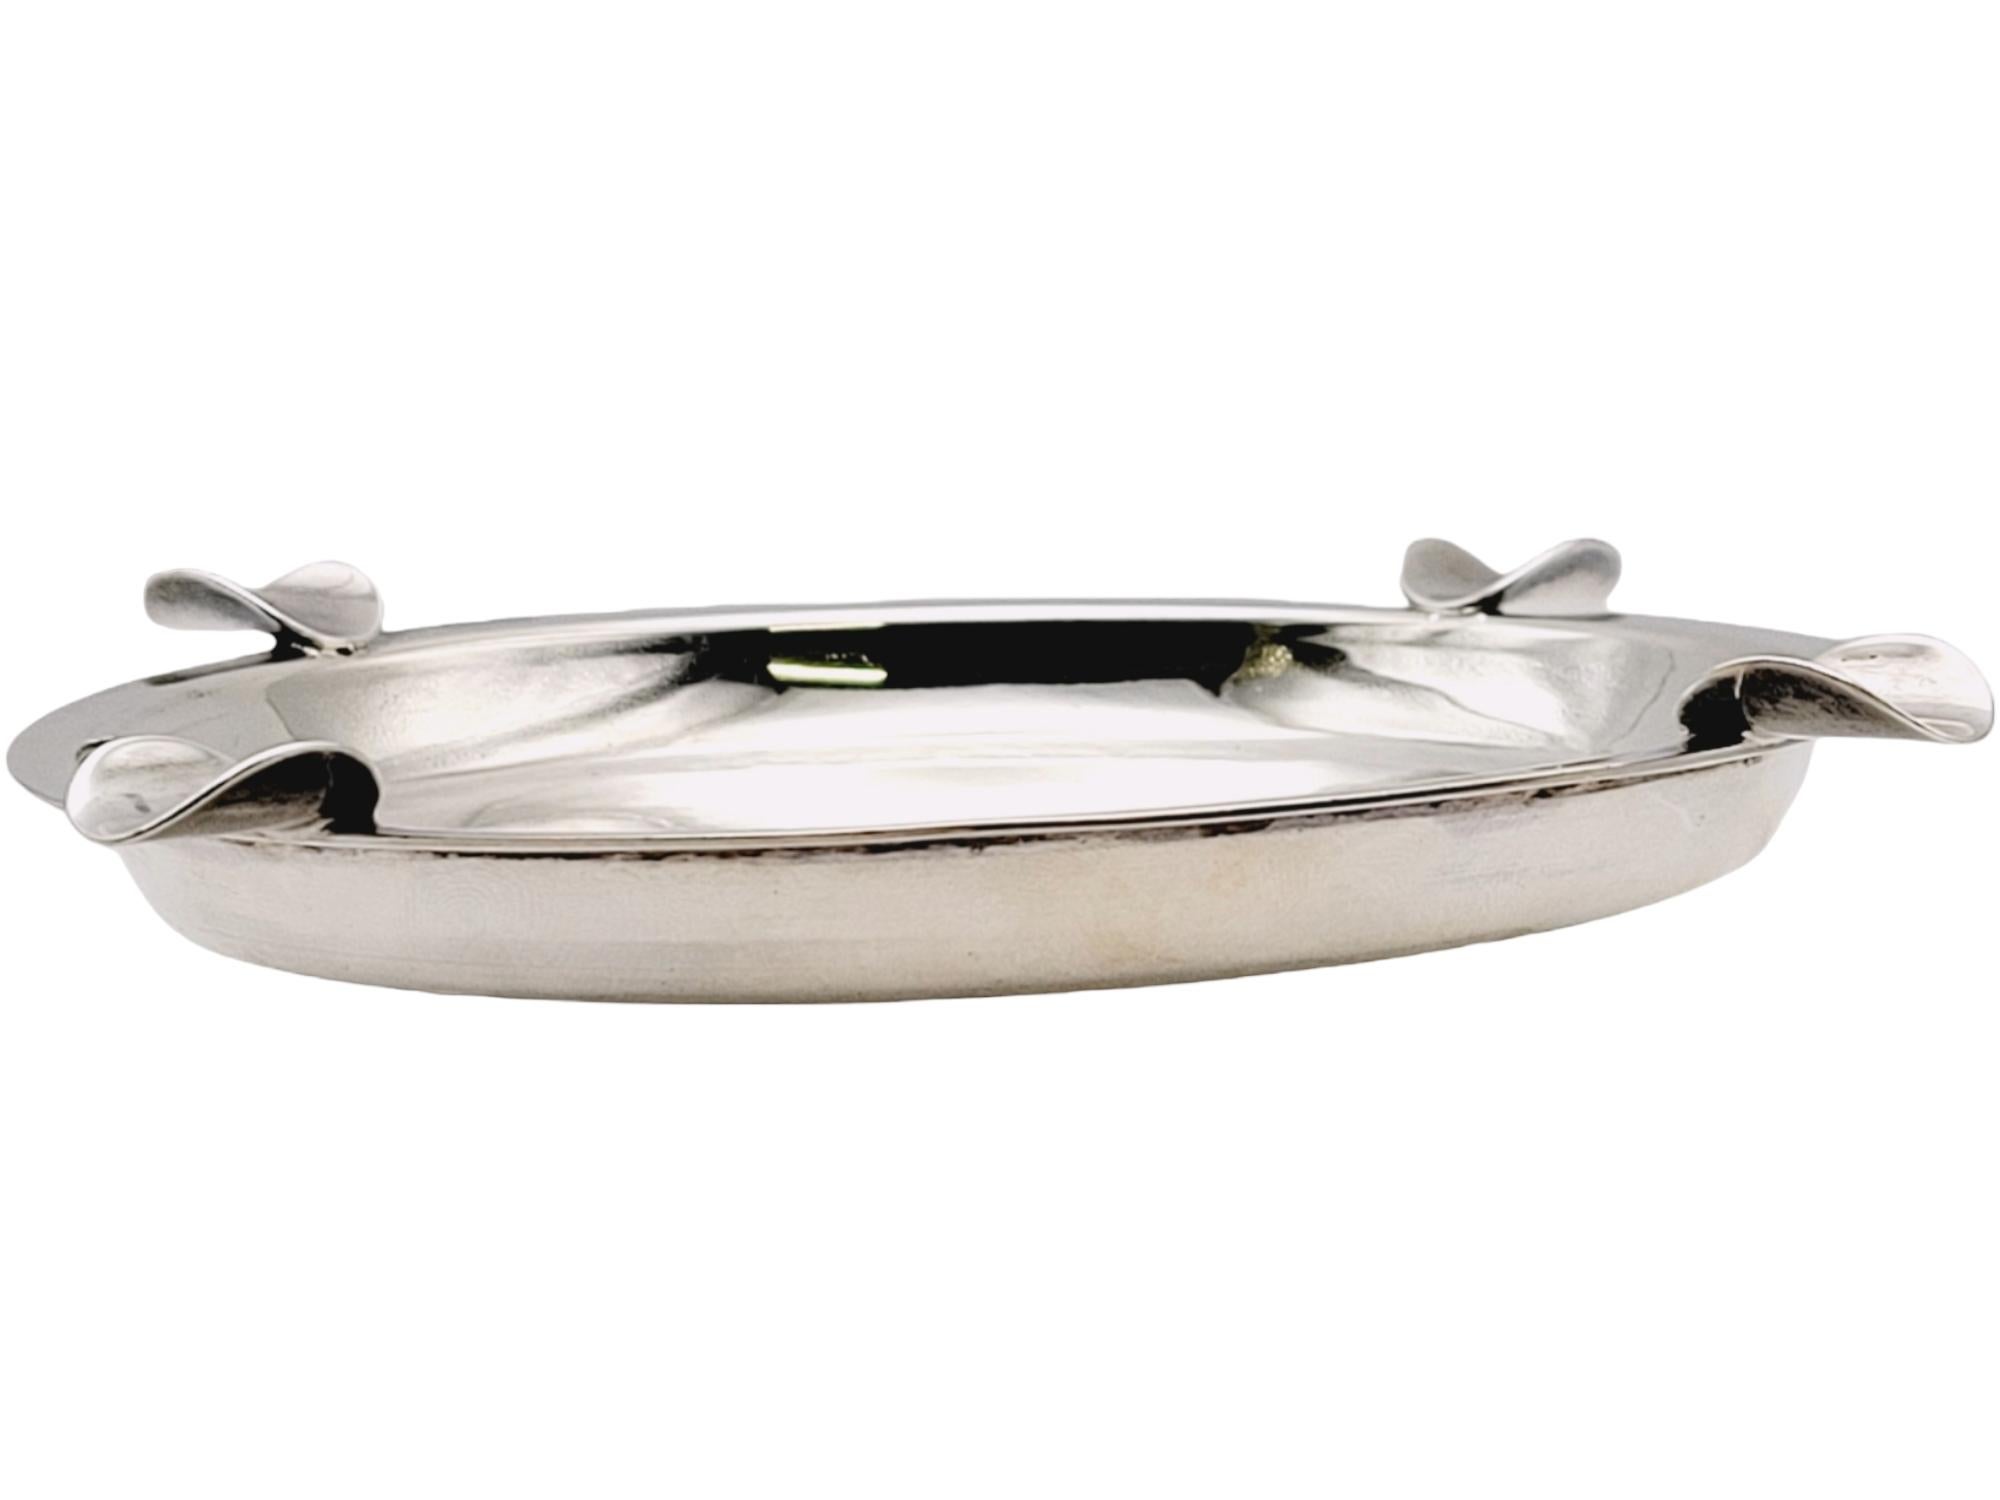 Carl Poul Petersen Polished Modern Ashtray in Sterling Silver, circa 1940-1970 For Sale 6